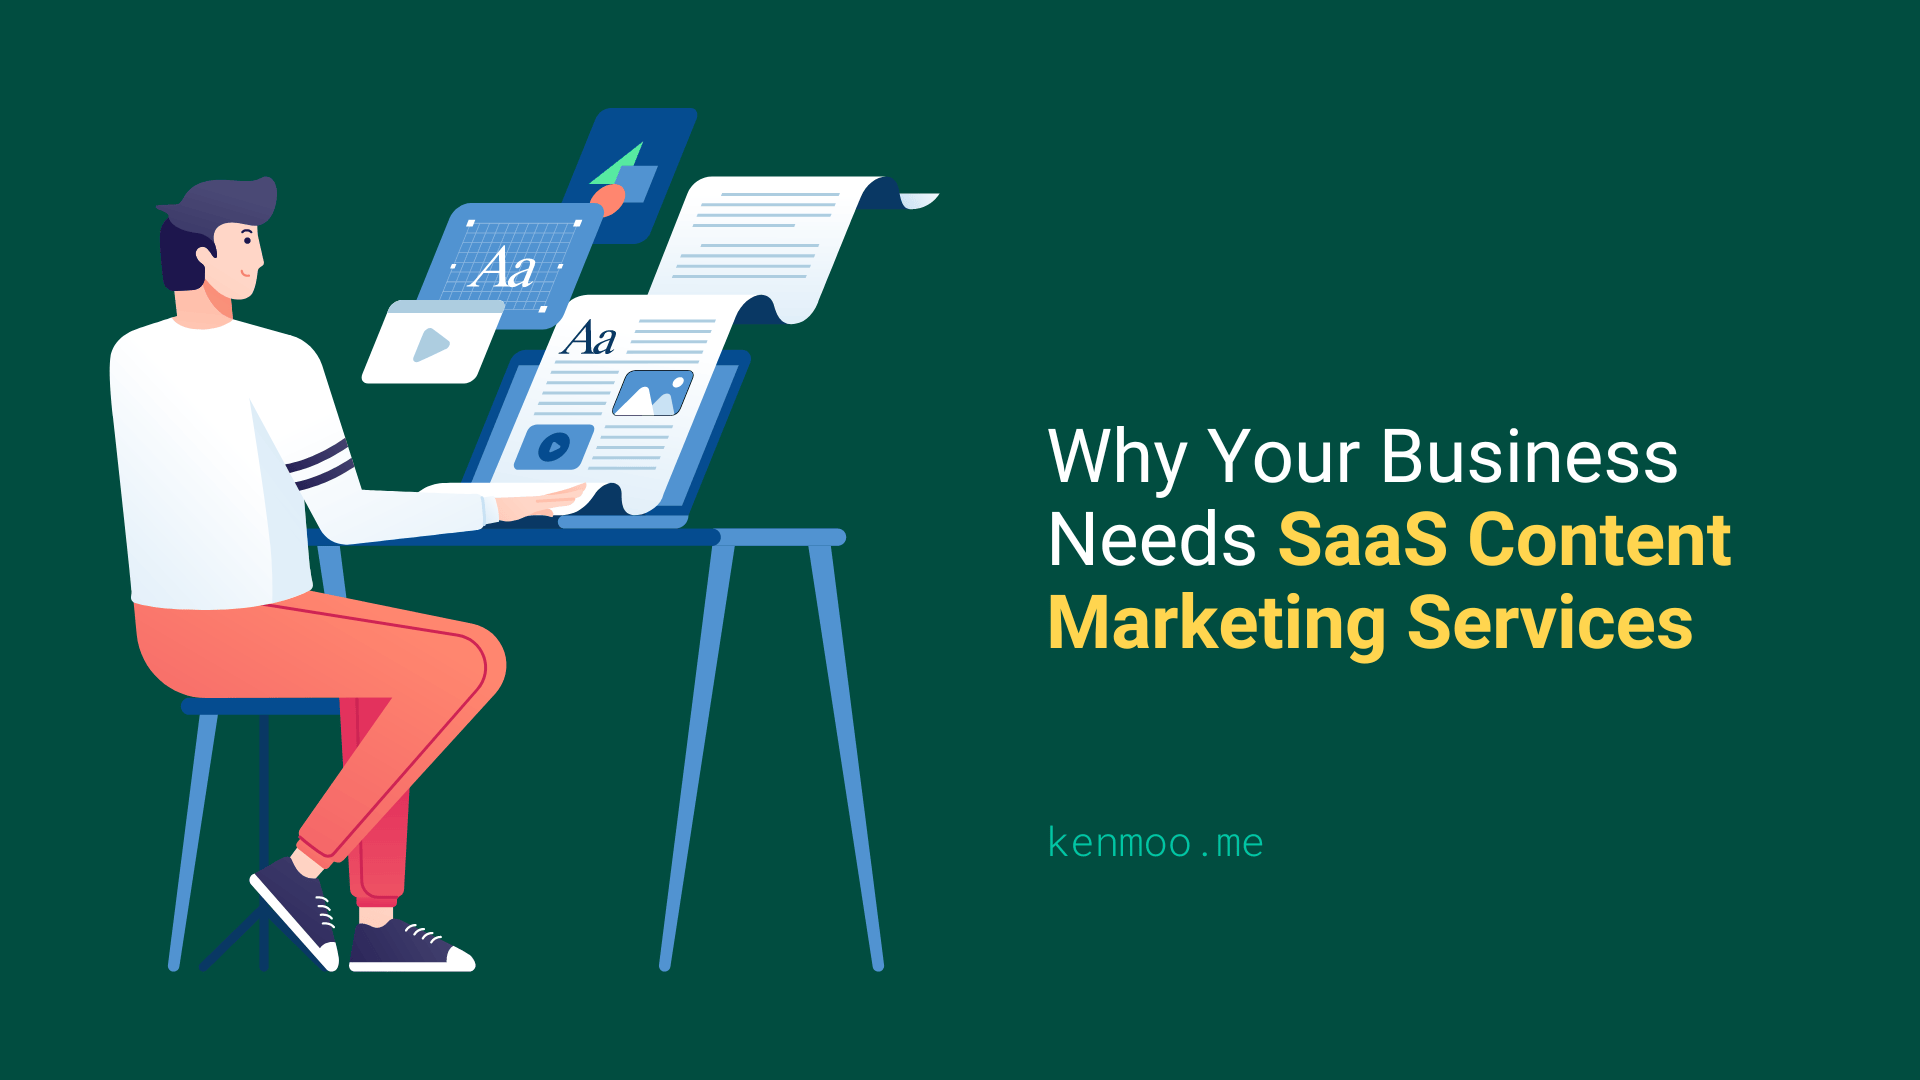 Why Your Business Needs SaaS Content Marketing Services